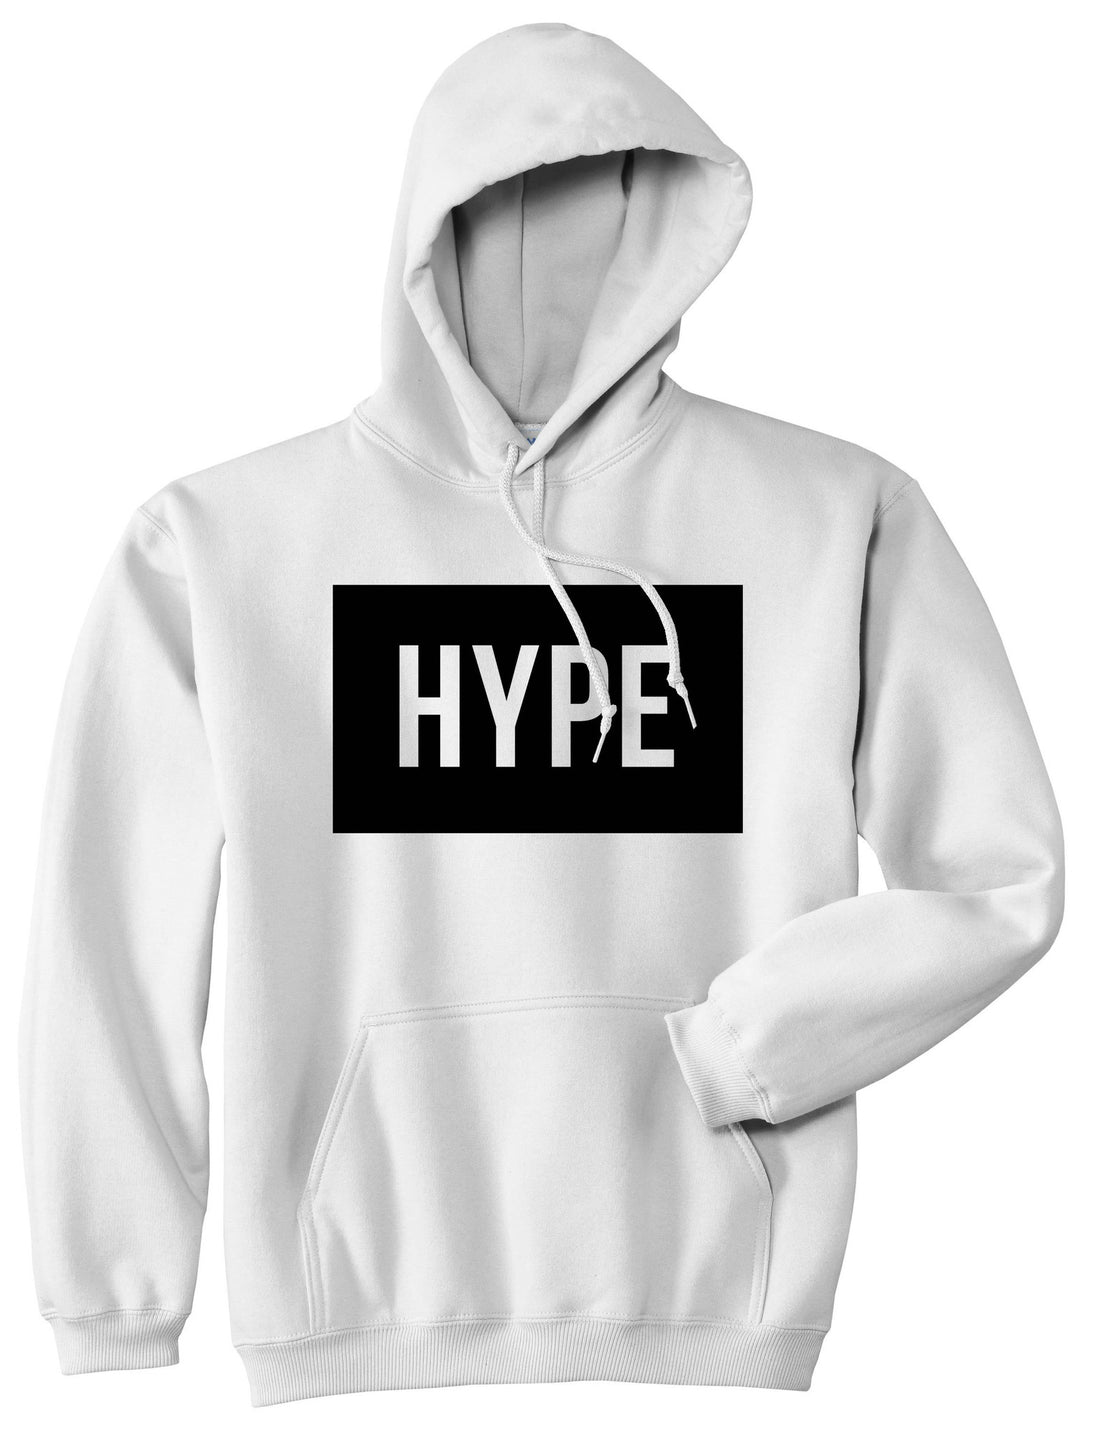 Hype Style Streetwear Brand Logo White by Kings Of NY Boys Kids Pullover Hoodie Hoody in White by Kings Of NY